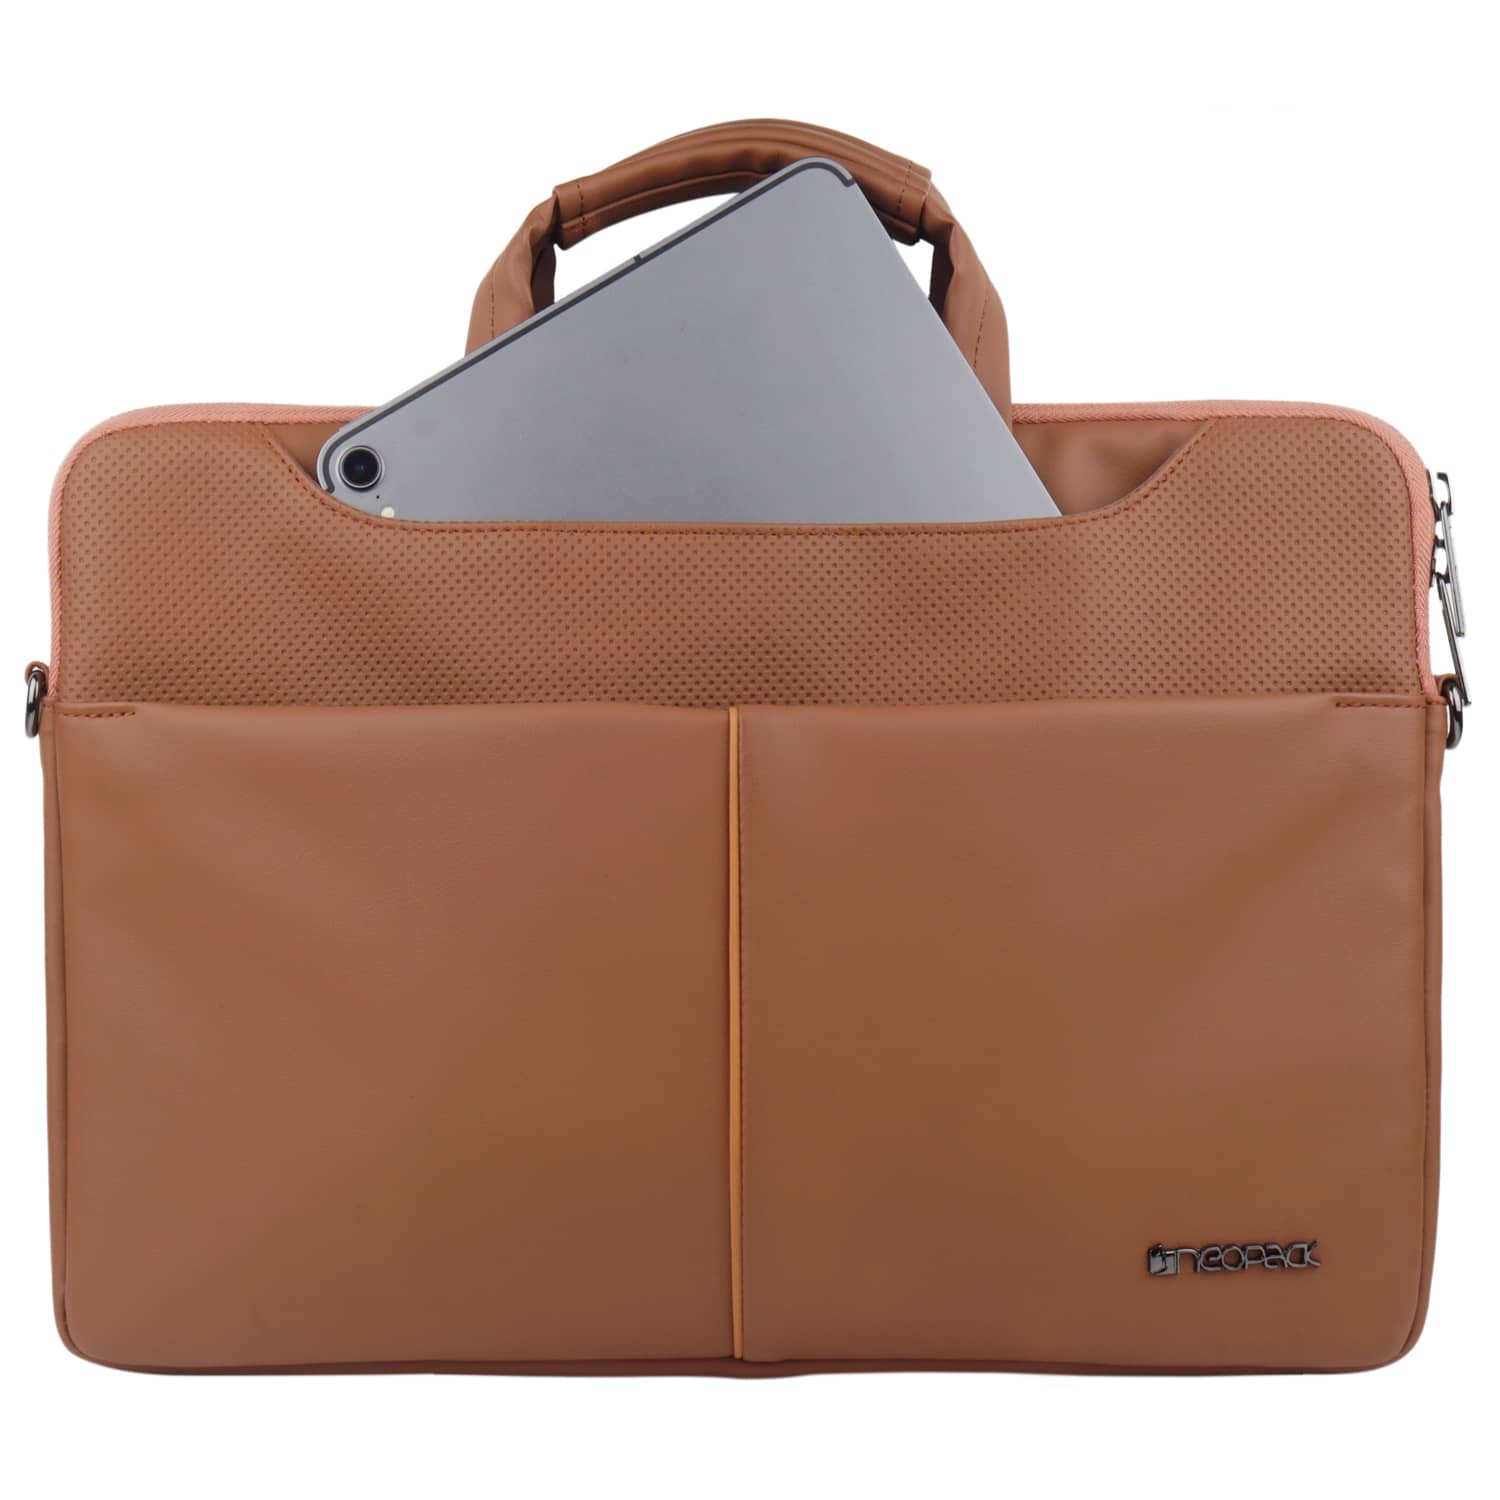 LENTION Leather Sleeve Case for MacBook and More